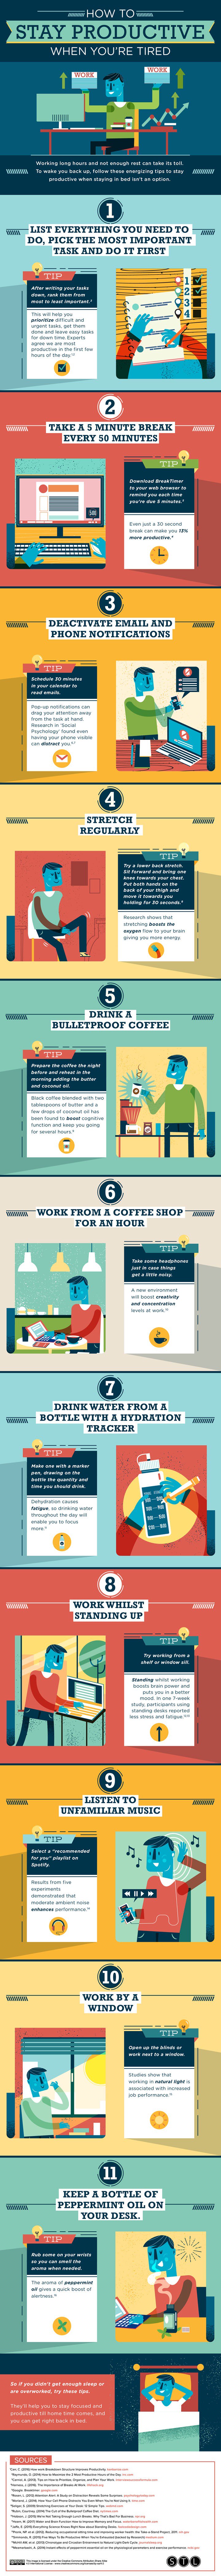 How to Stay Productive When You're Tired